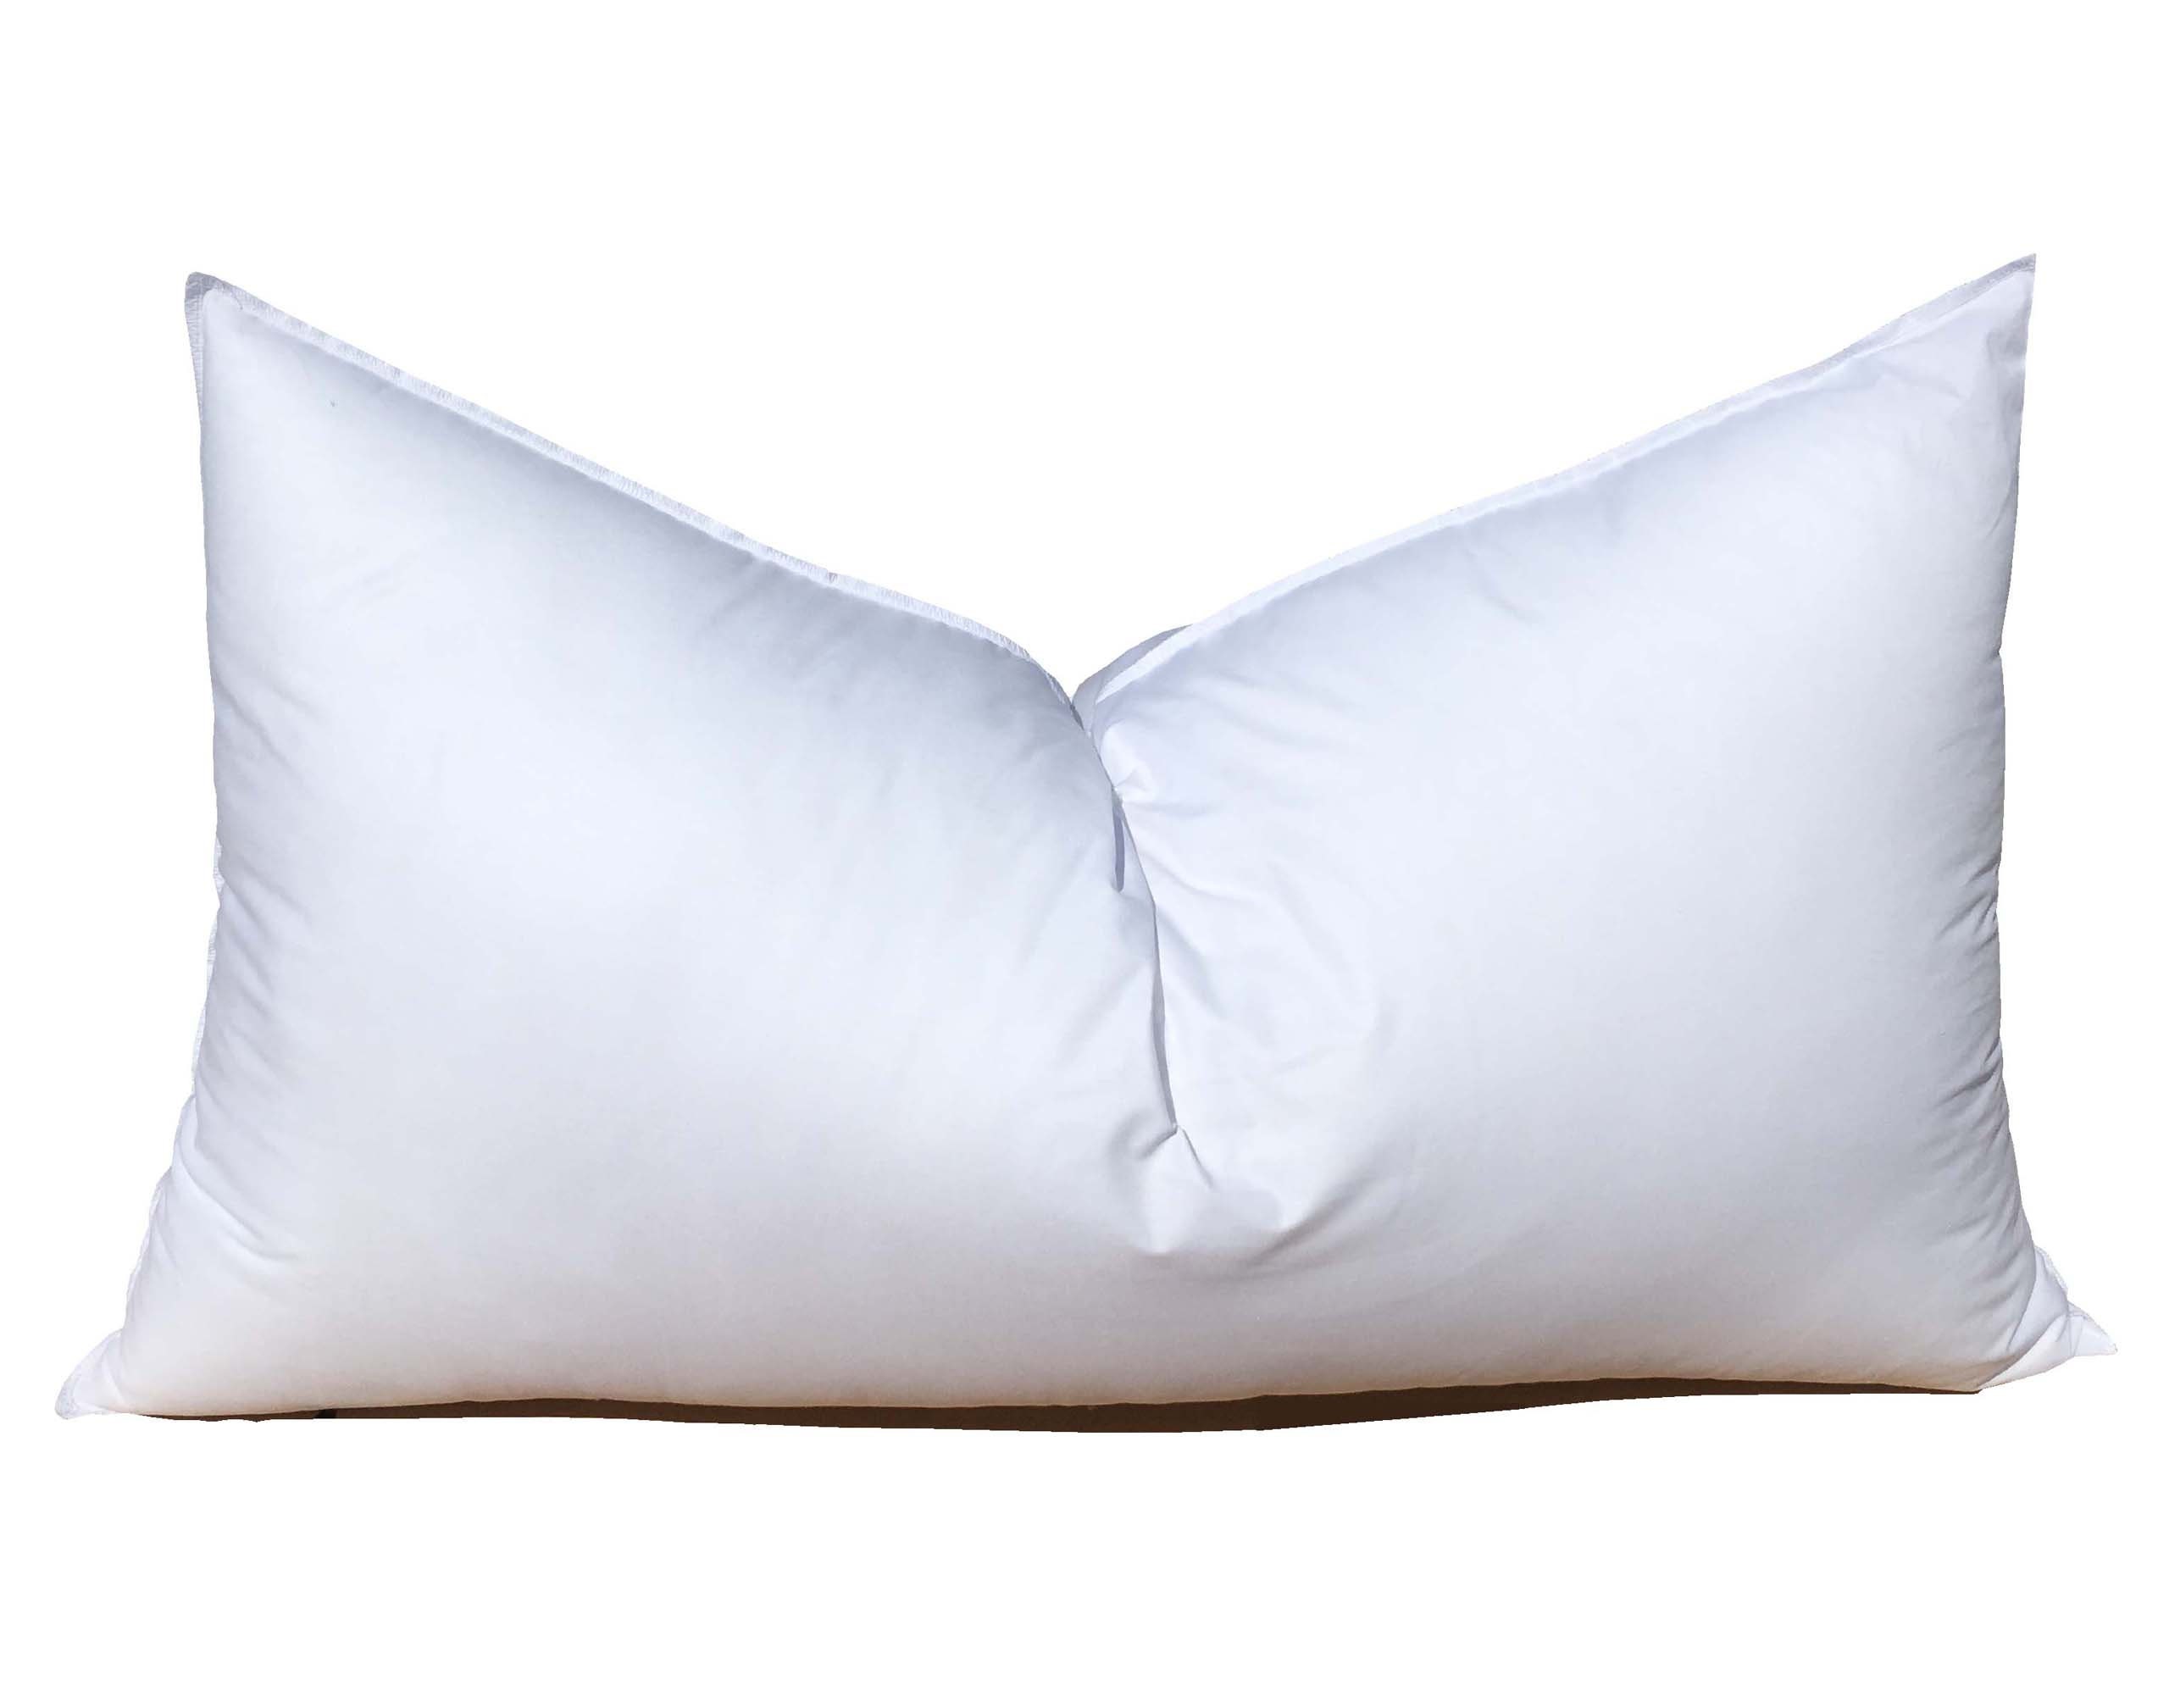 6 Pack Hometex Canada Pillow Insert 12 x 24 Polyester Filled Standard Cover